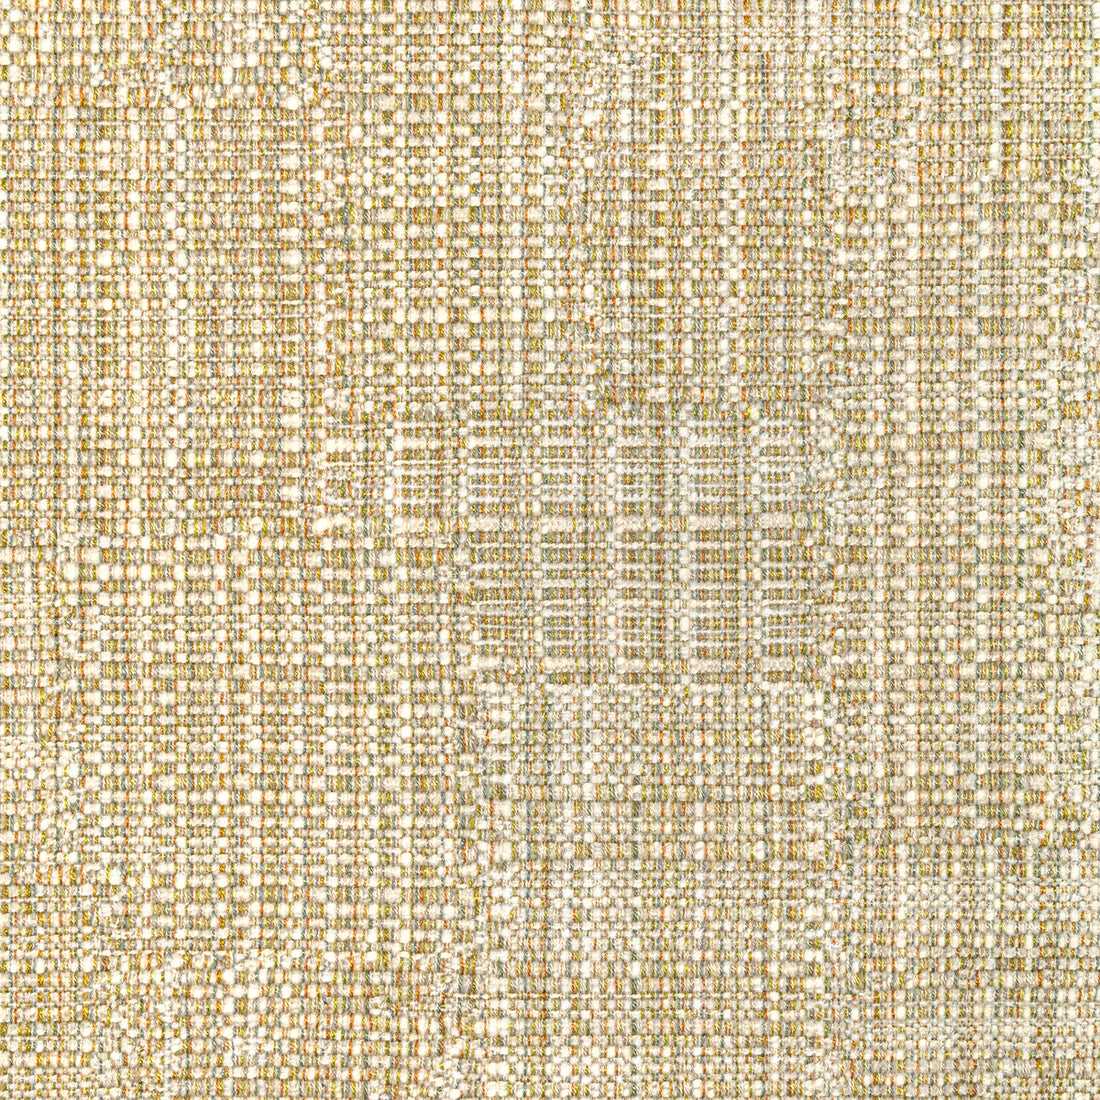 Seedbed fabric in golden olive color - pattern 36385.1161.0 - by Kravet Couture in the Barbara Barry Ojai collection